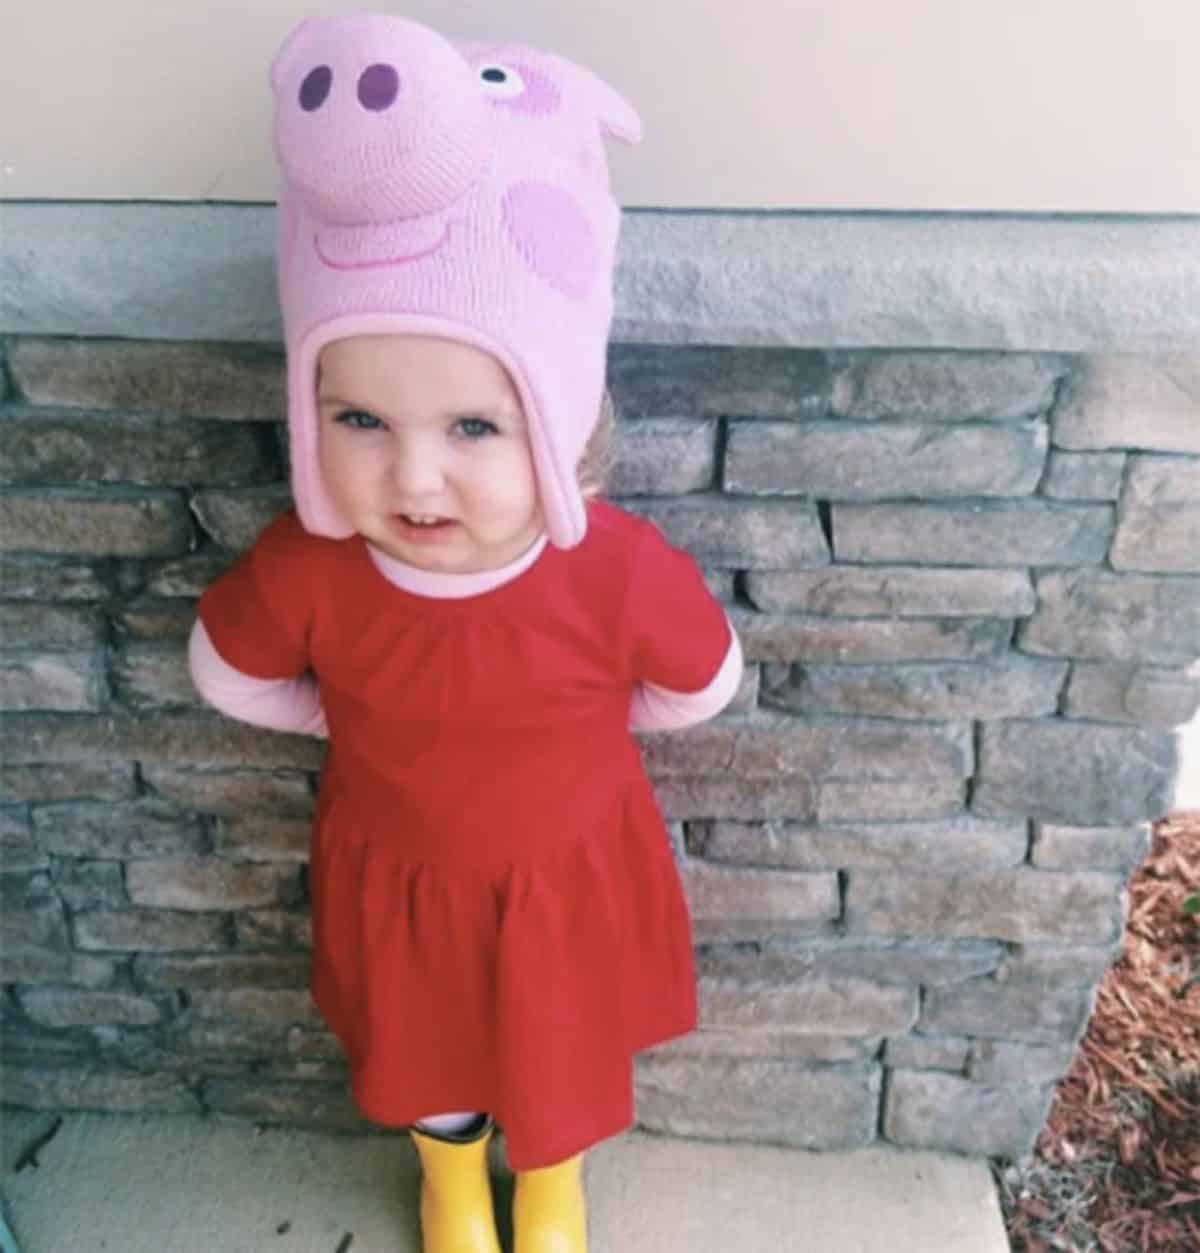 Little girlin a red dress with peppa pig hat leaning on a wall.